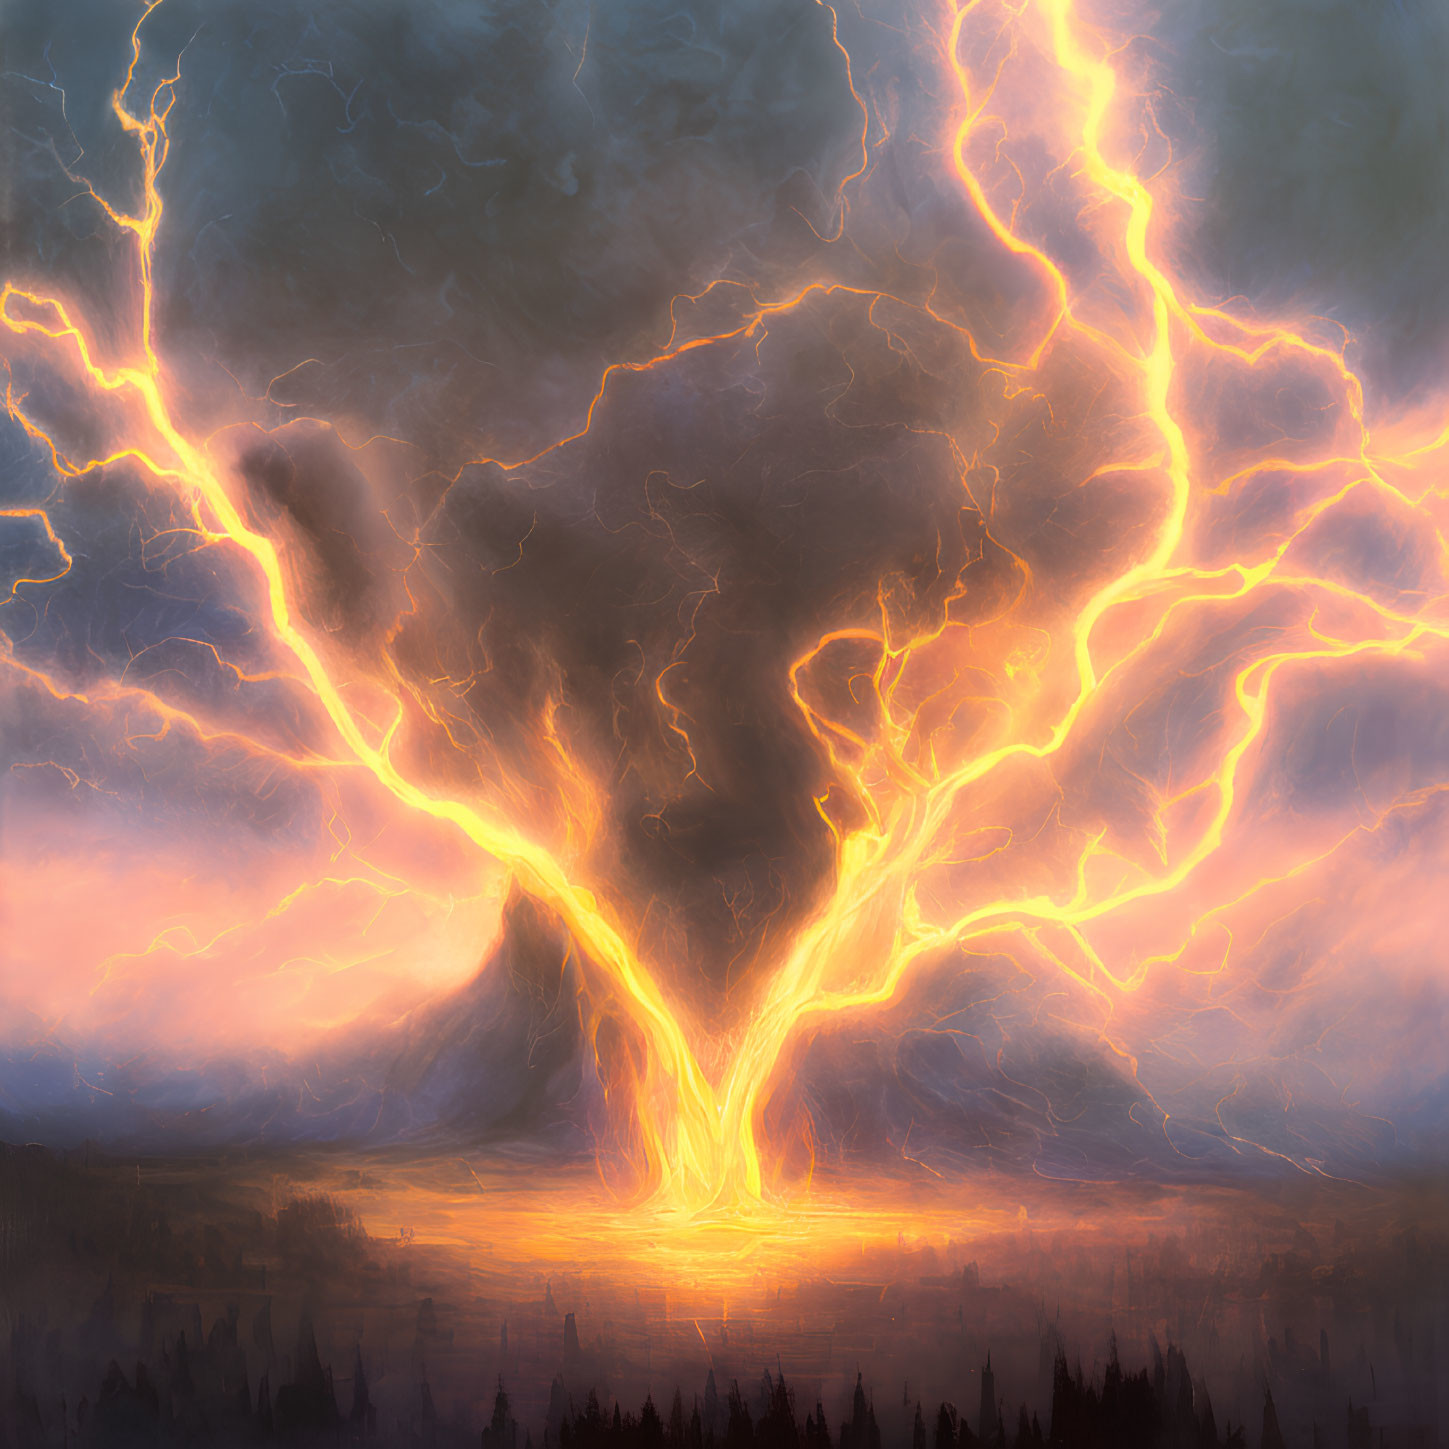 Ethereal landscape with lightning tree against dramatic sky